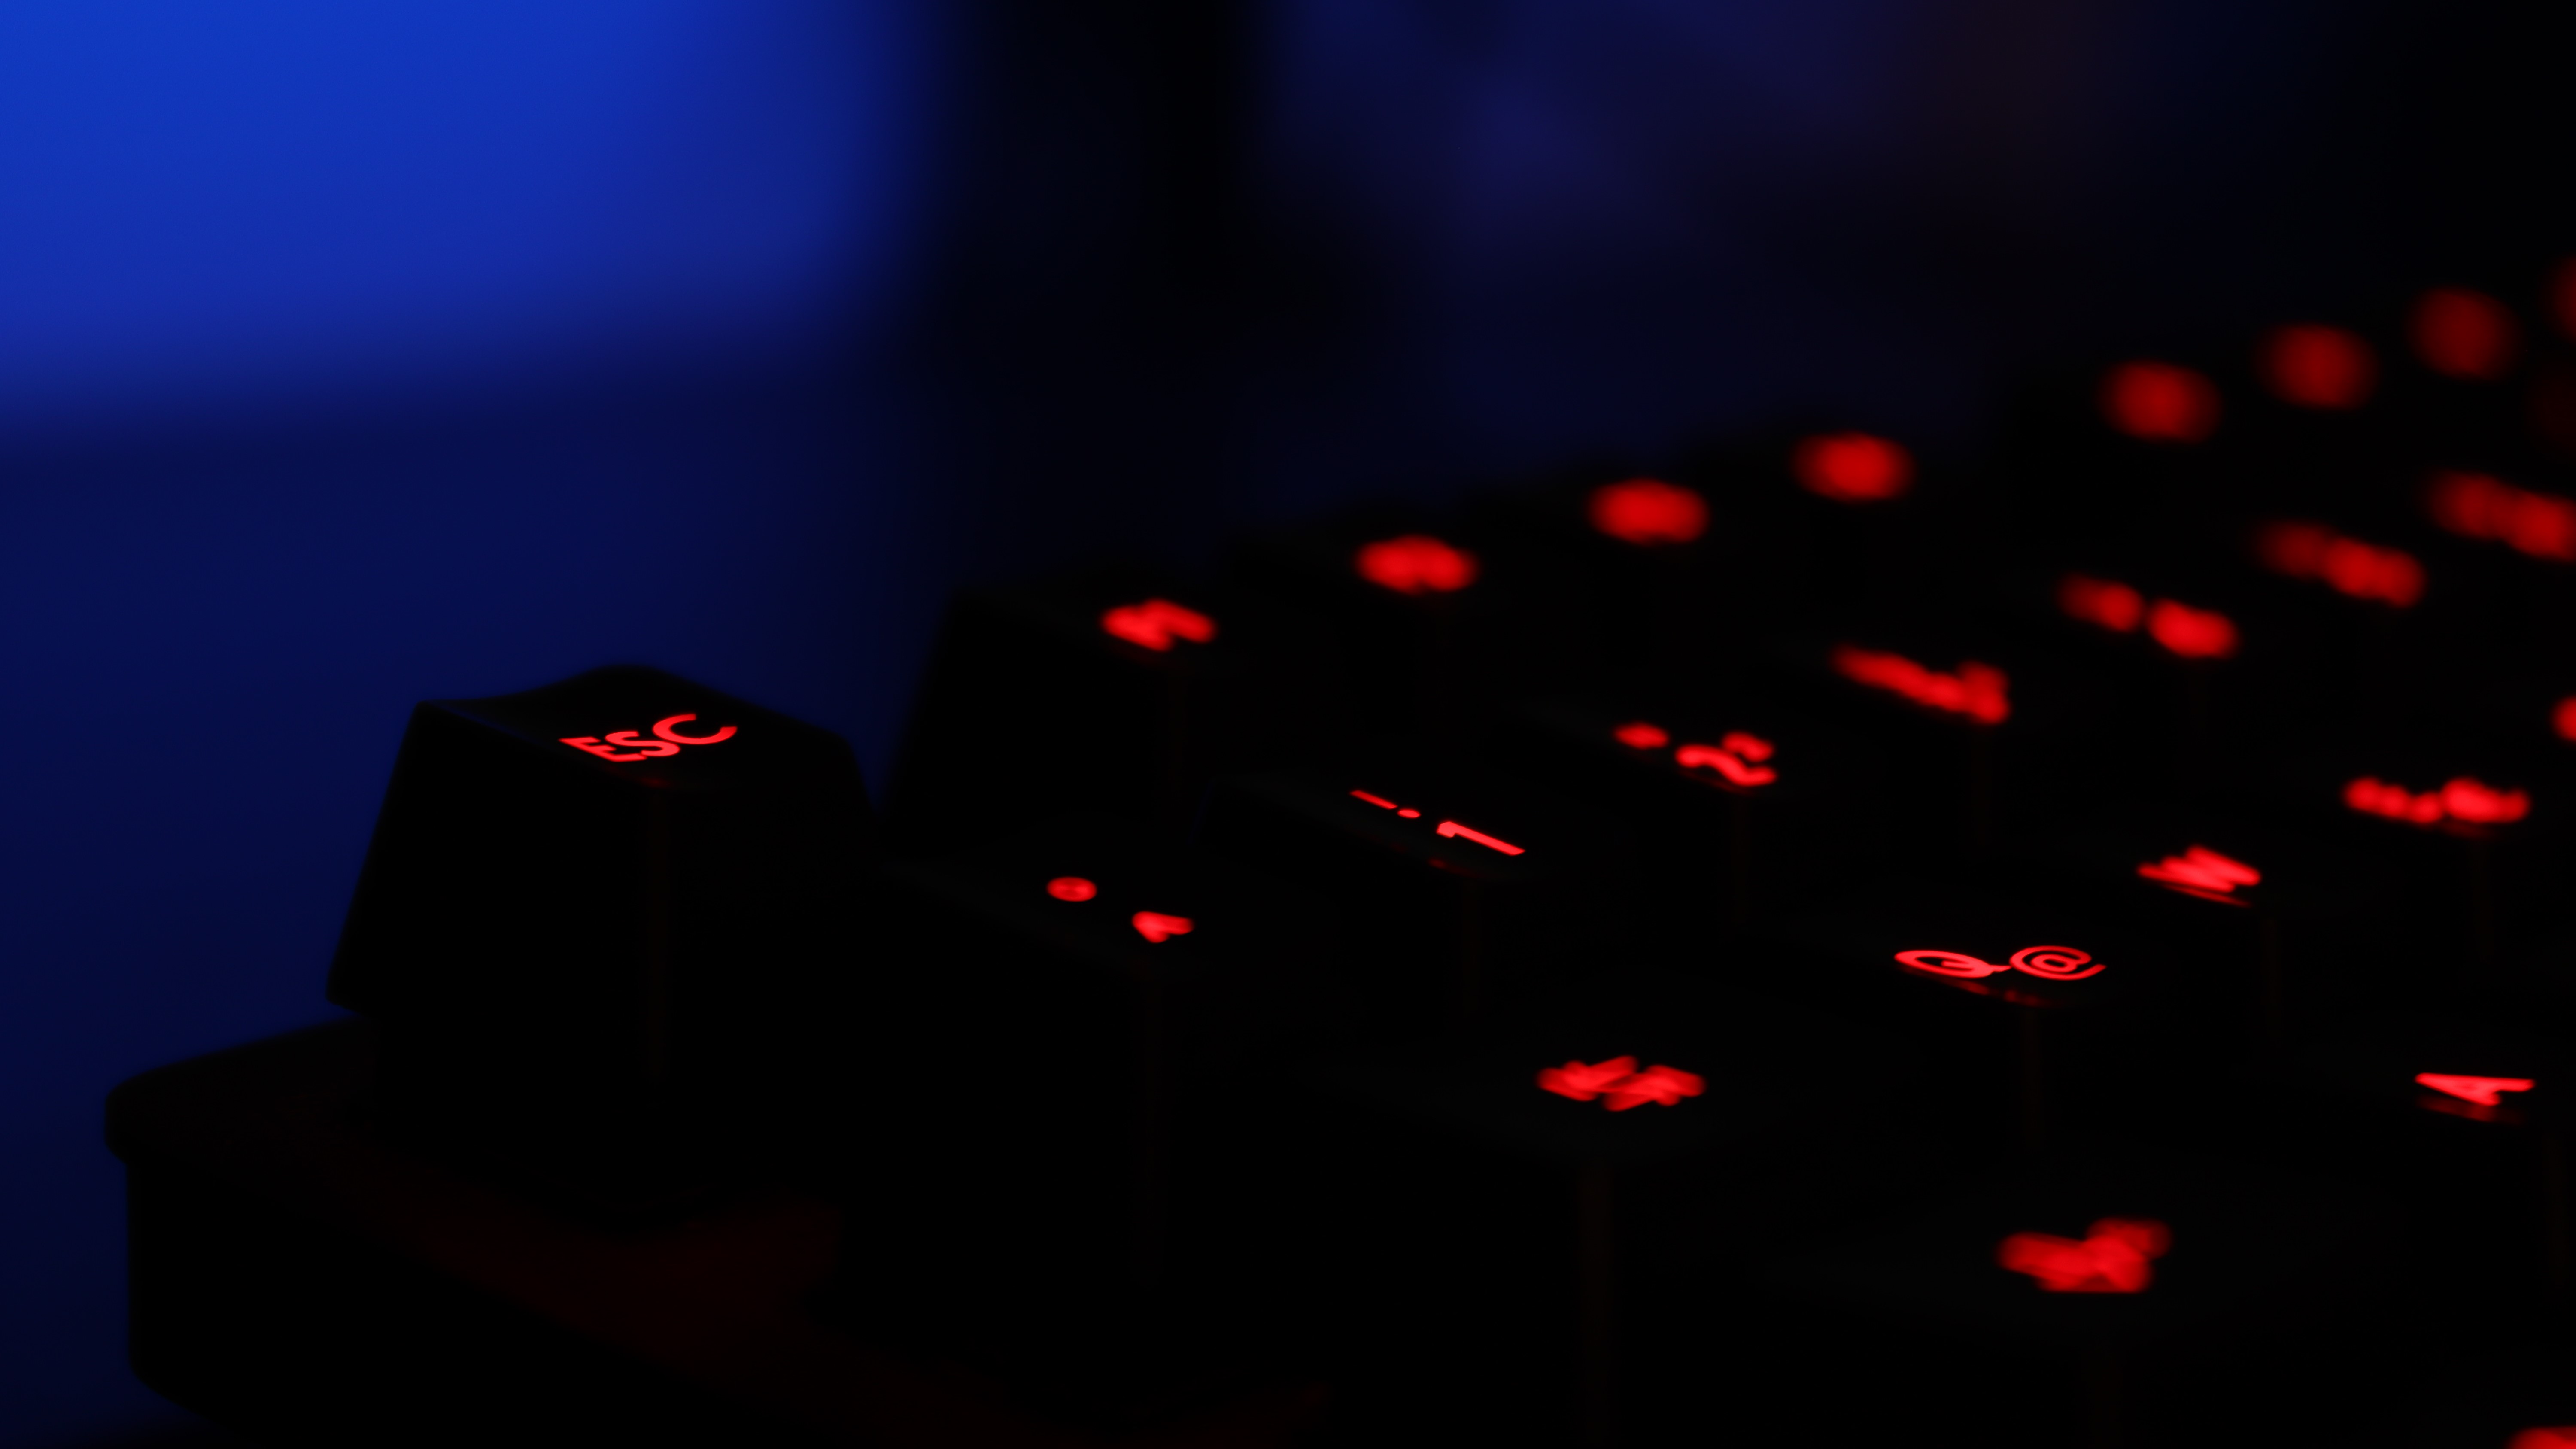 General 6000x3375 keyboards technology dark numbers red